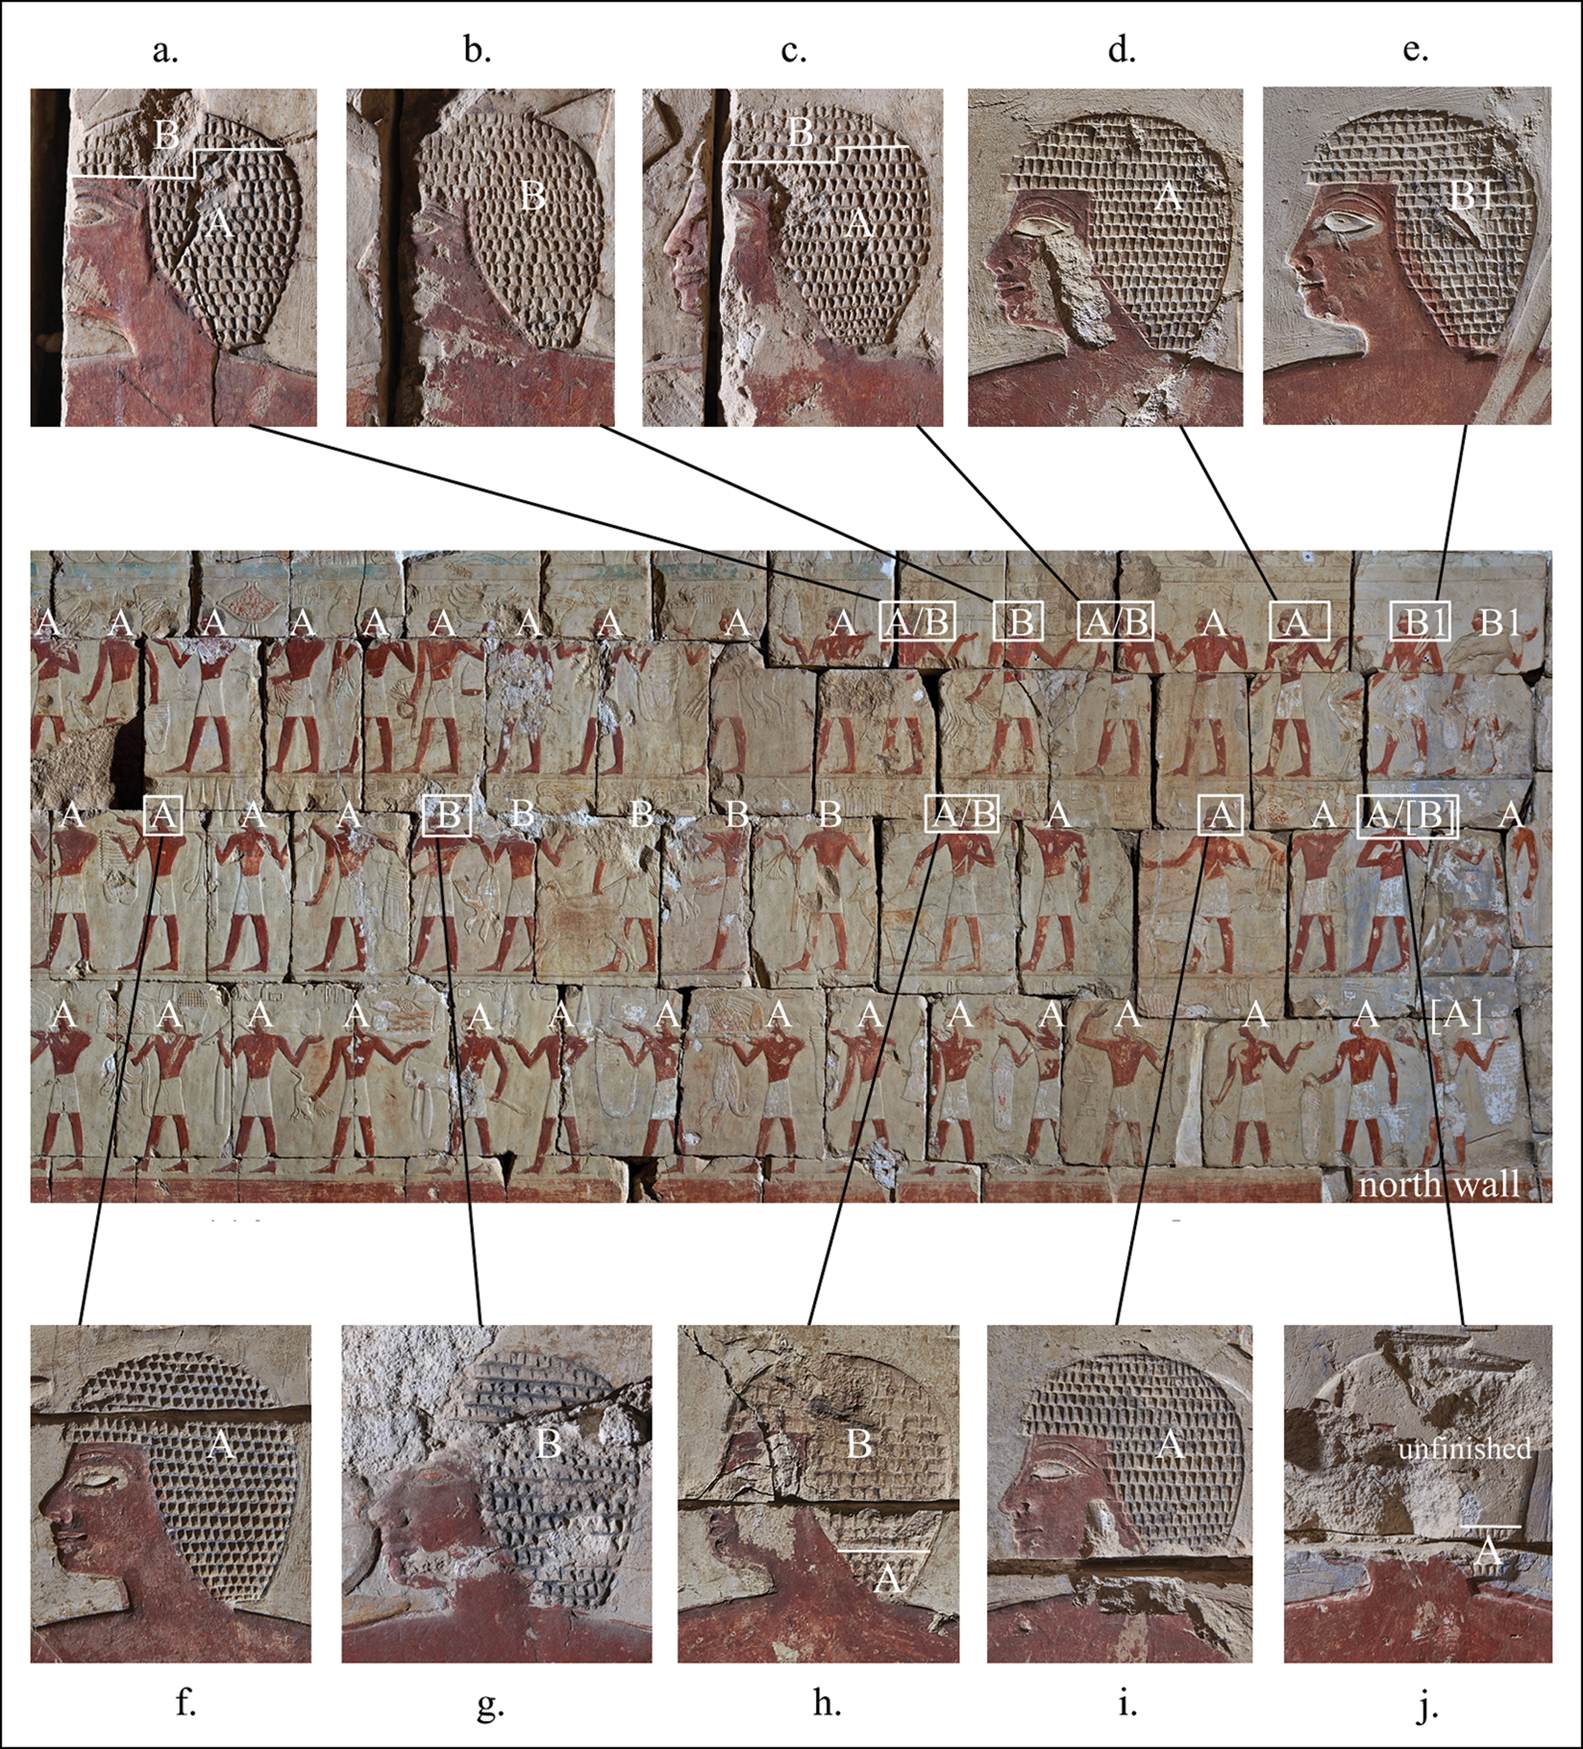 Estimated working areas for experienced artists (A) and apprentices (B) on the north wall of the chapel. Credit: Anastasiia Stupko-Lubczynska / Antiquity, 2021